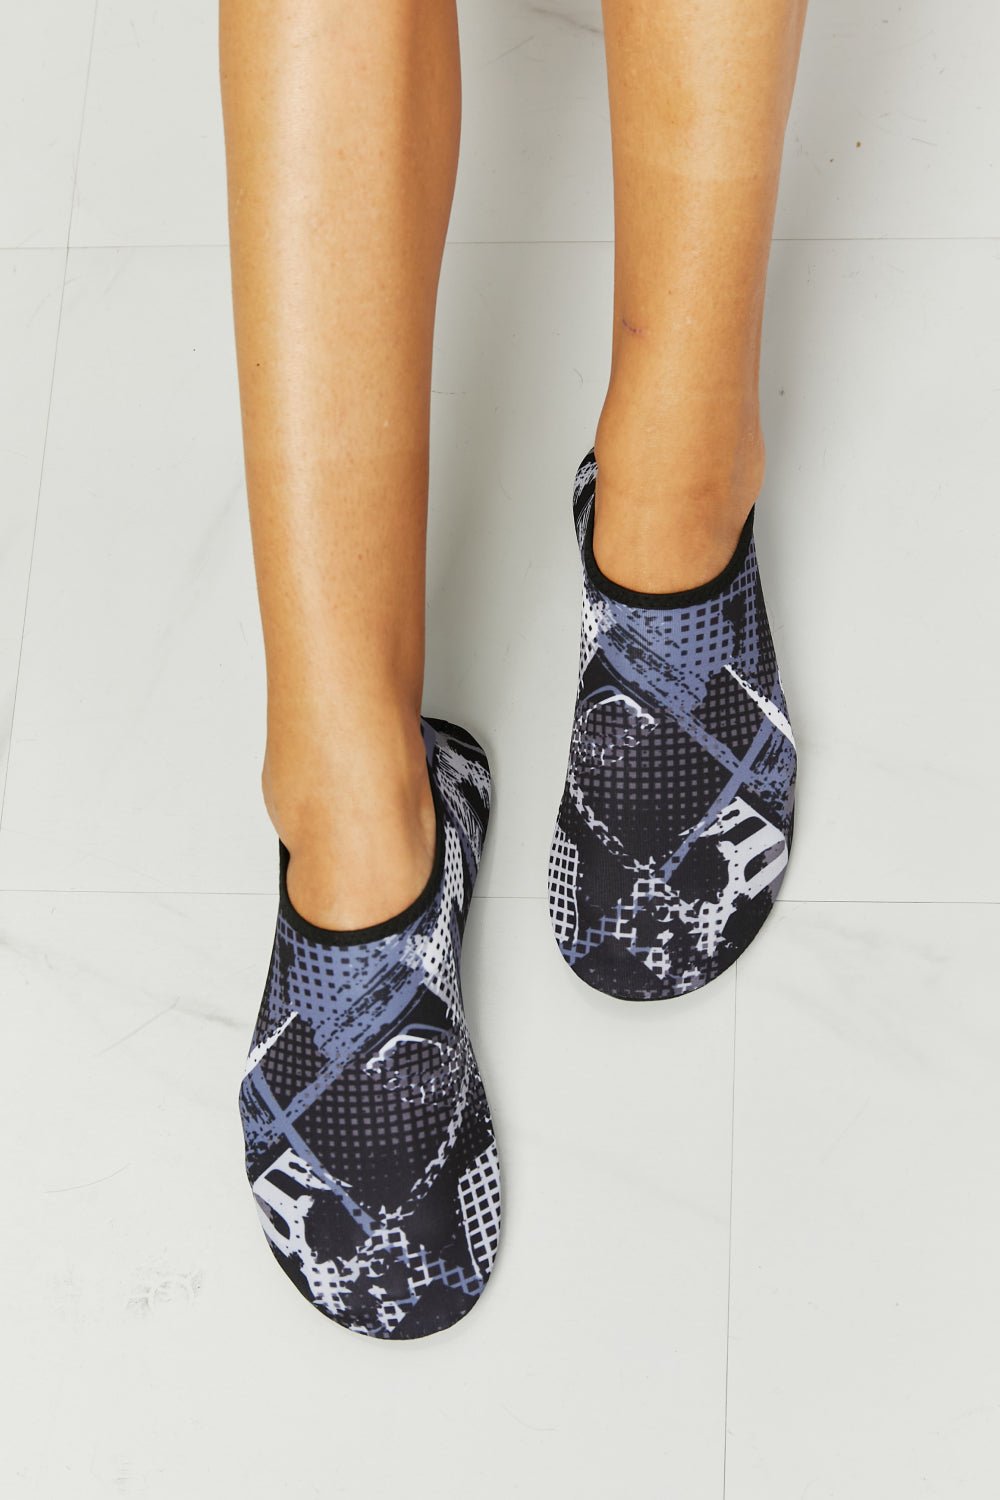 MMshoes On The Shore Water Shoes in Black Pattern - Guy Christopher